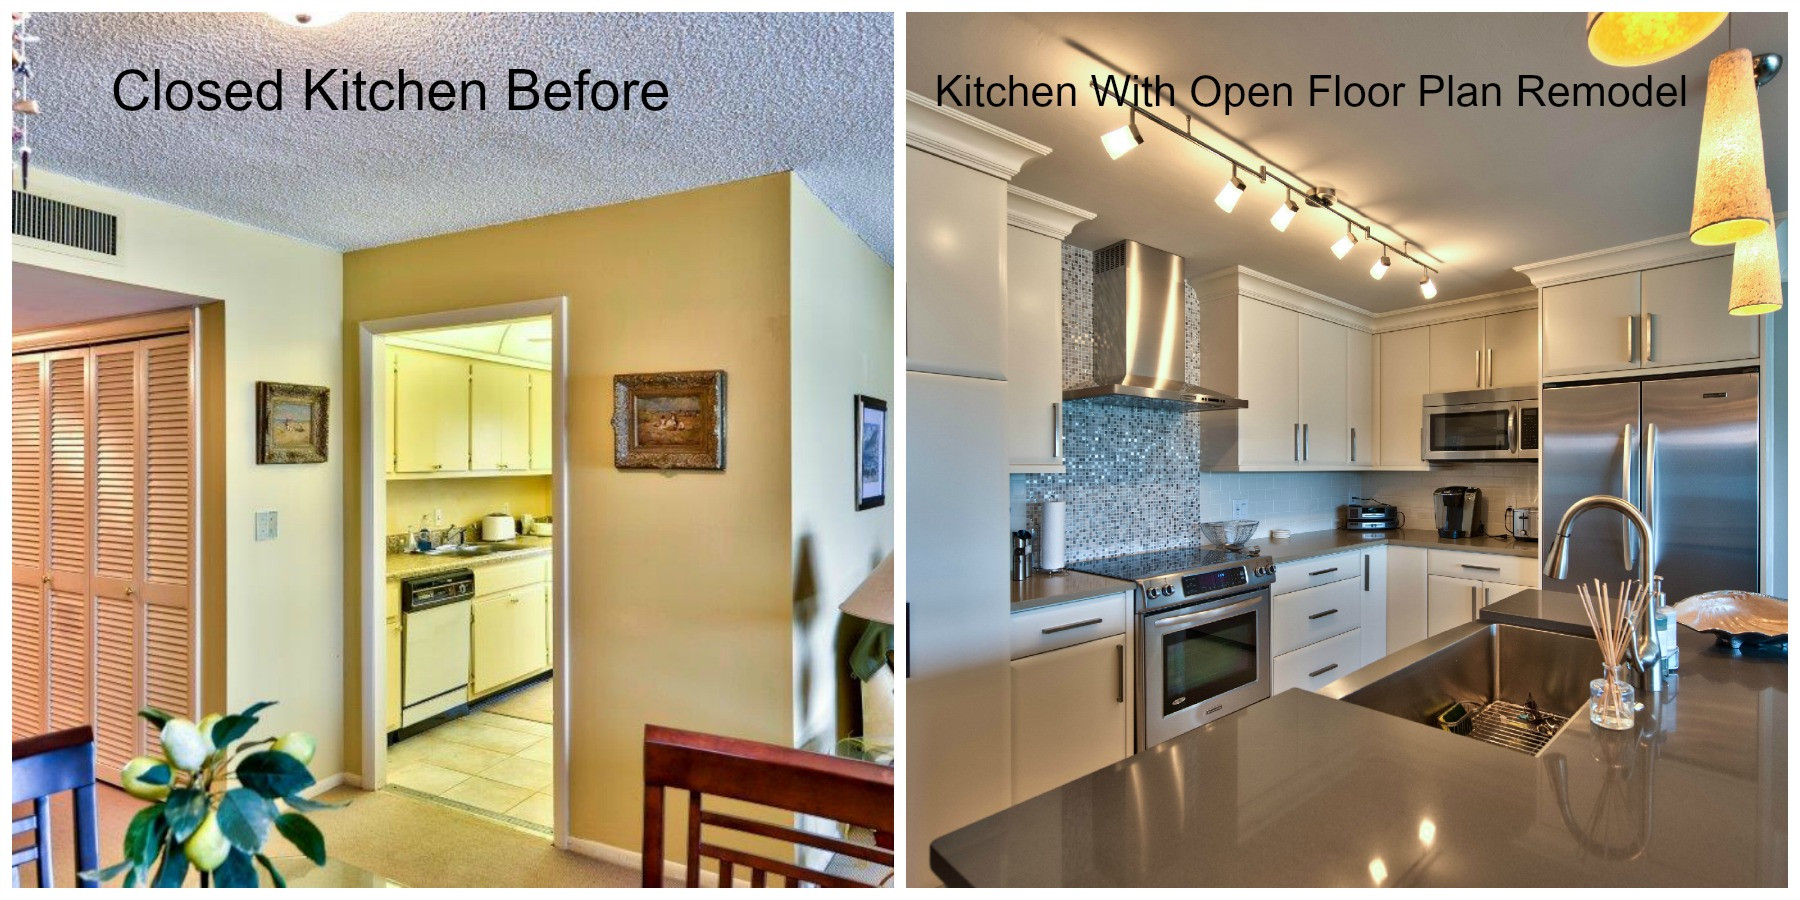 Kitchen Remodel Before And After
 Kitchen Before and After s